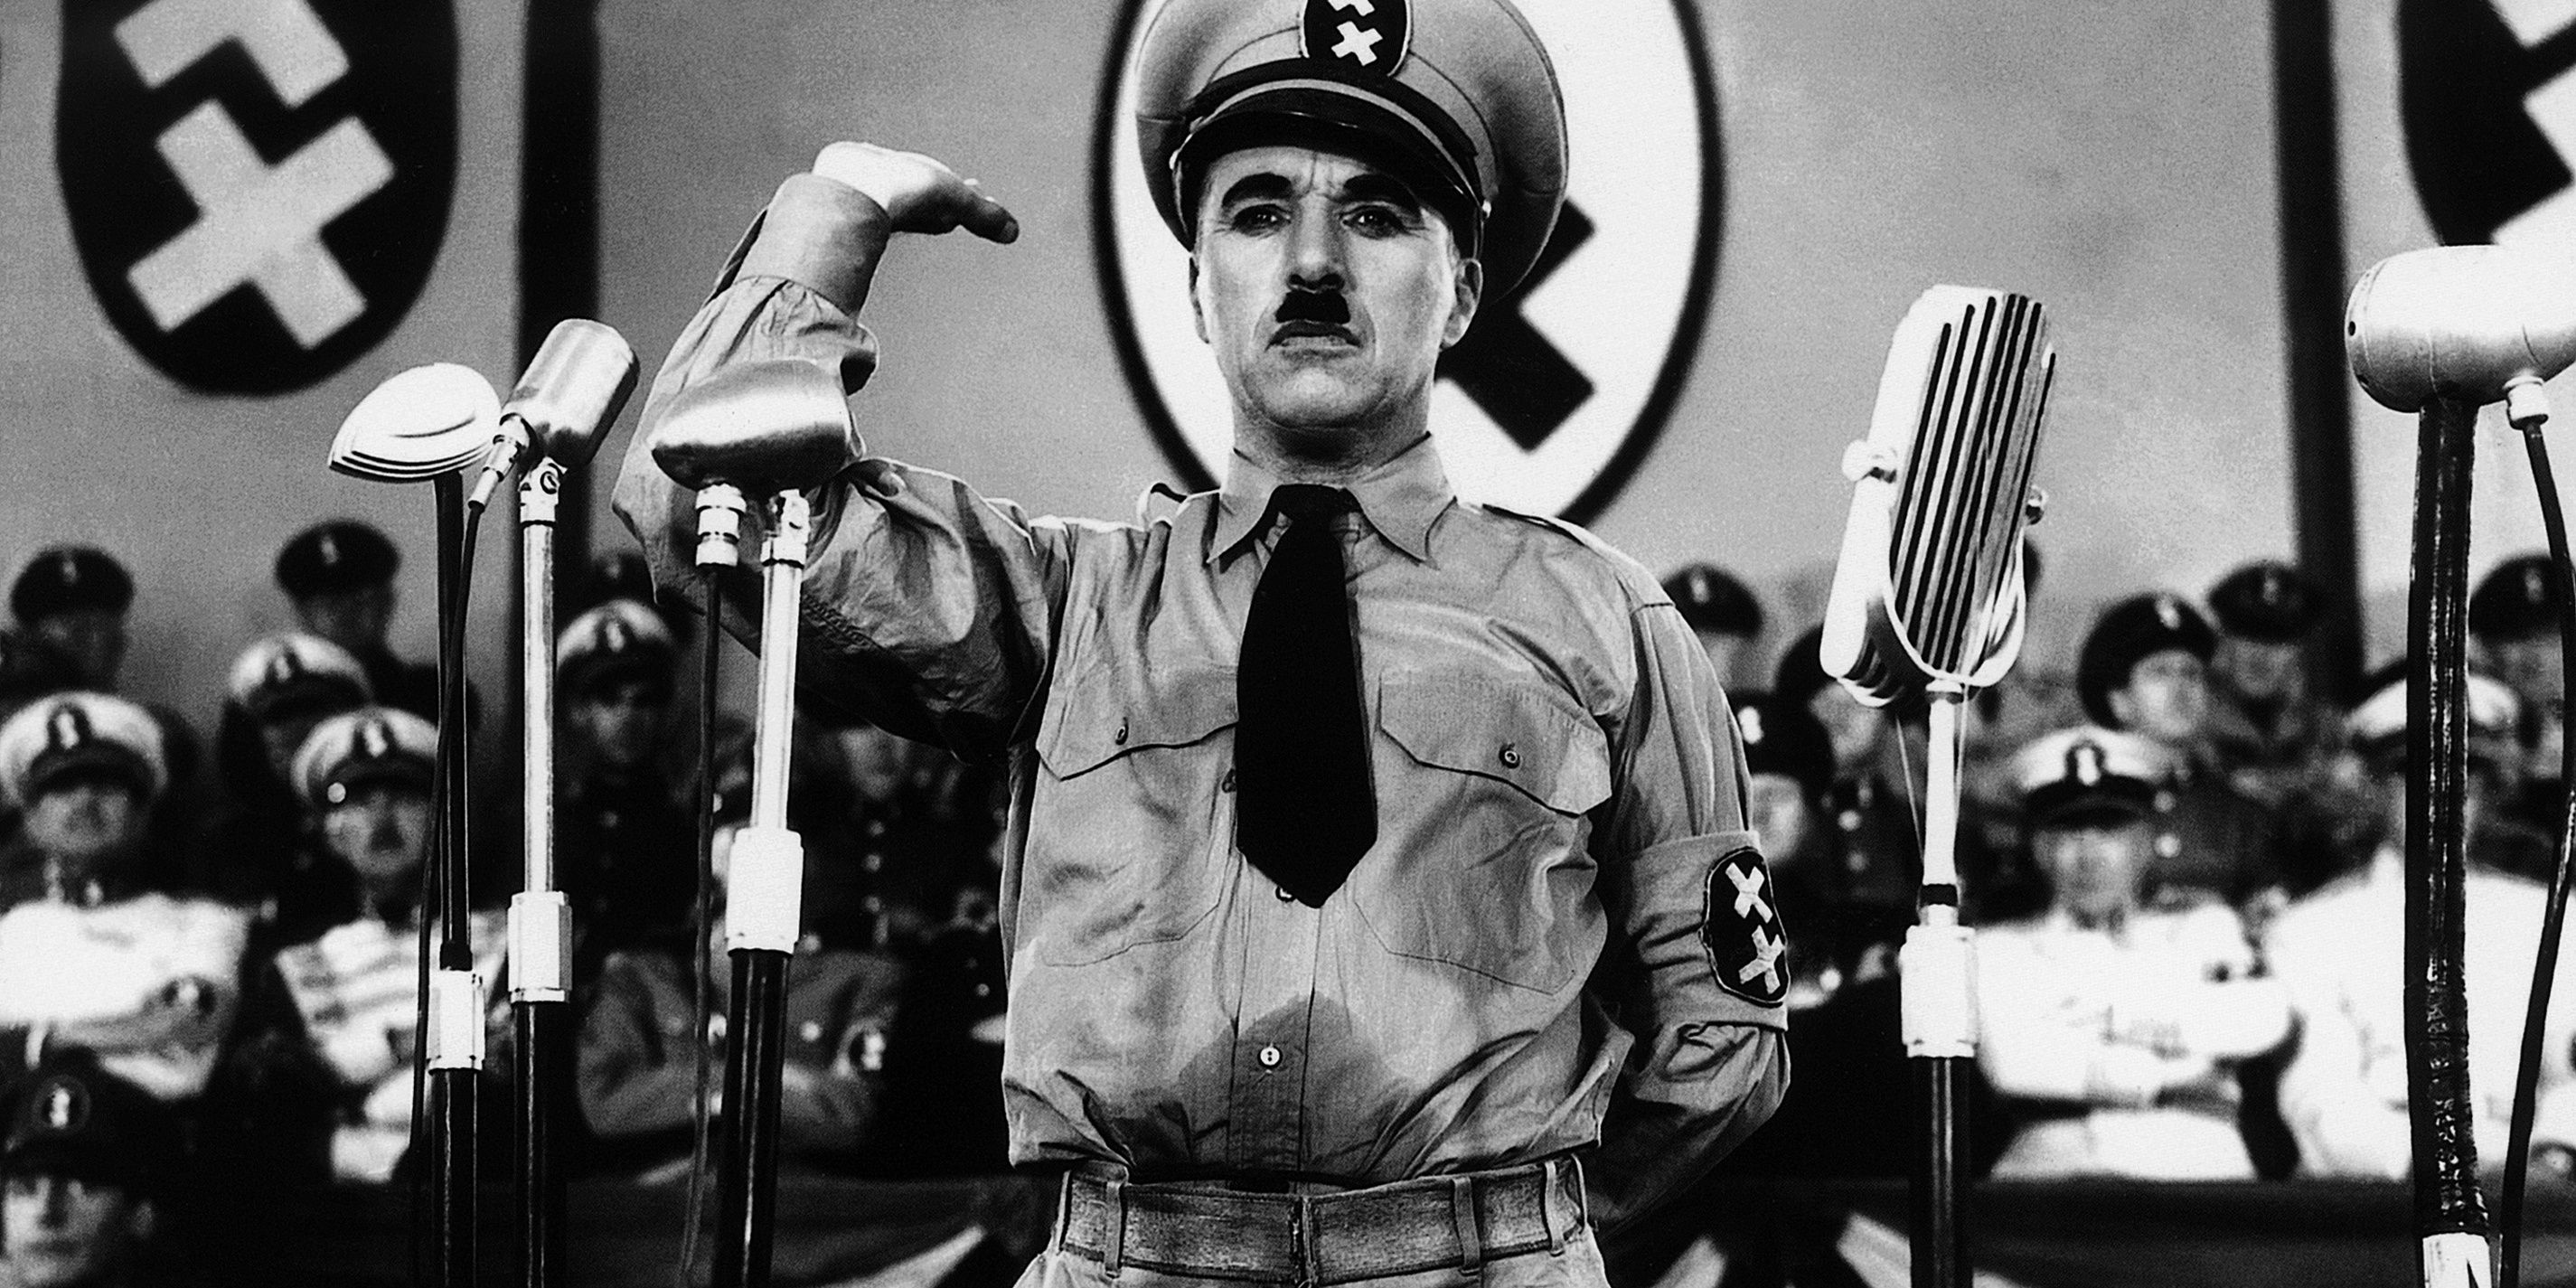 Adenoid Hynkel gives a speech in The Great Dictator giving a speech